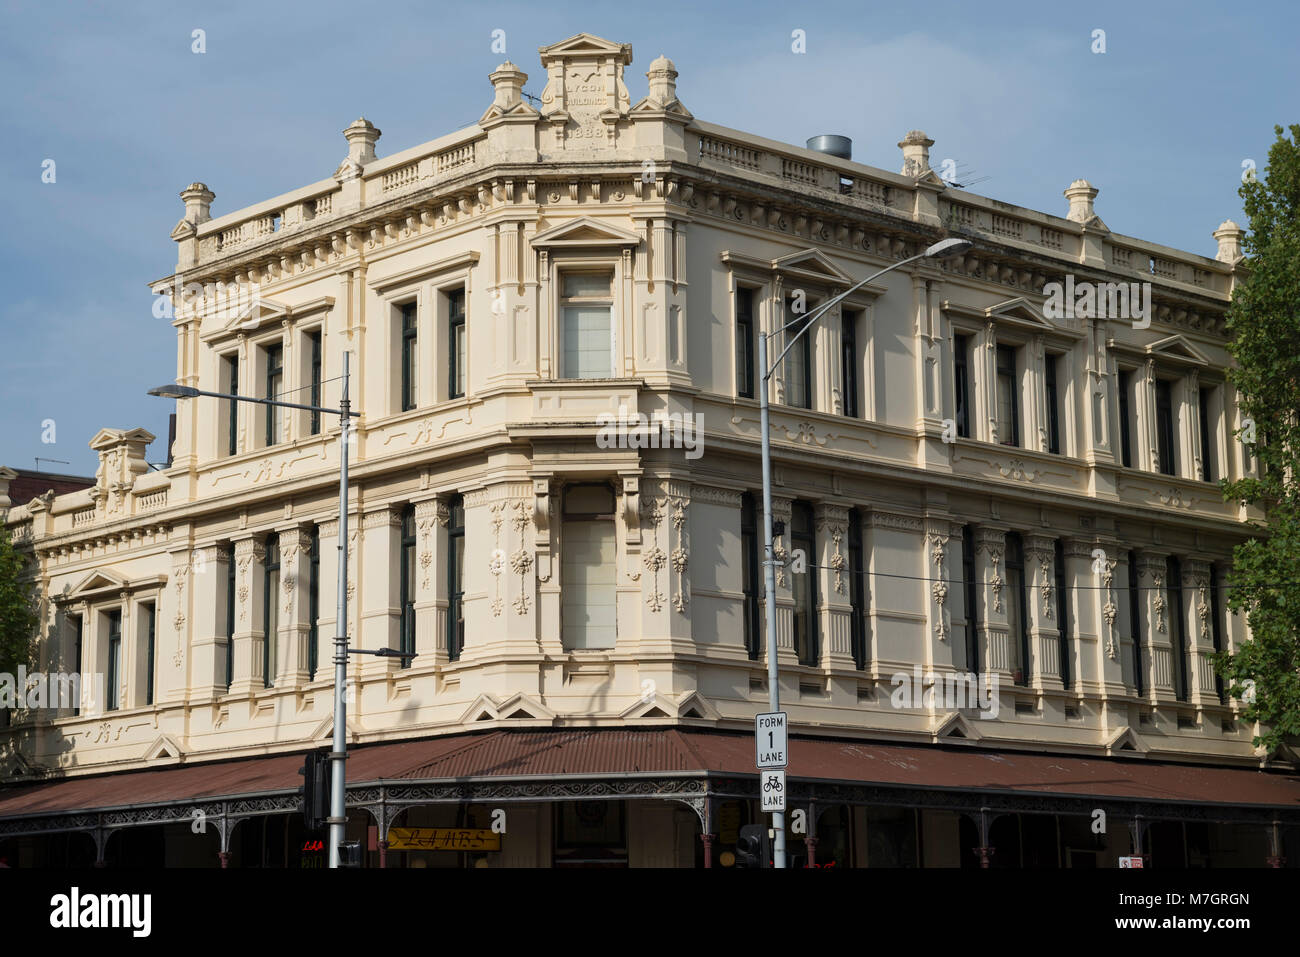 The Lygon Buildings in Lygon Street, Melbourne, Australia, designed by the architect George De Lacy Evans, were built in 1888. Stock Photo